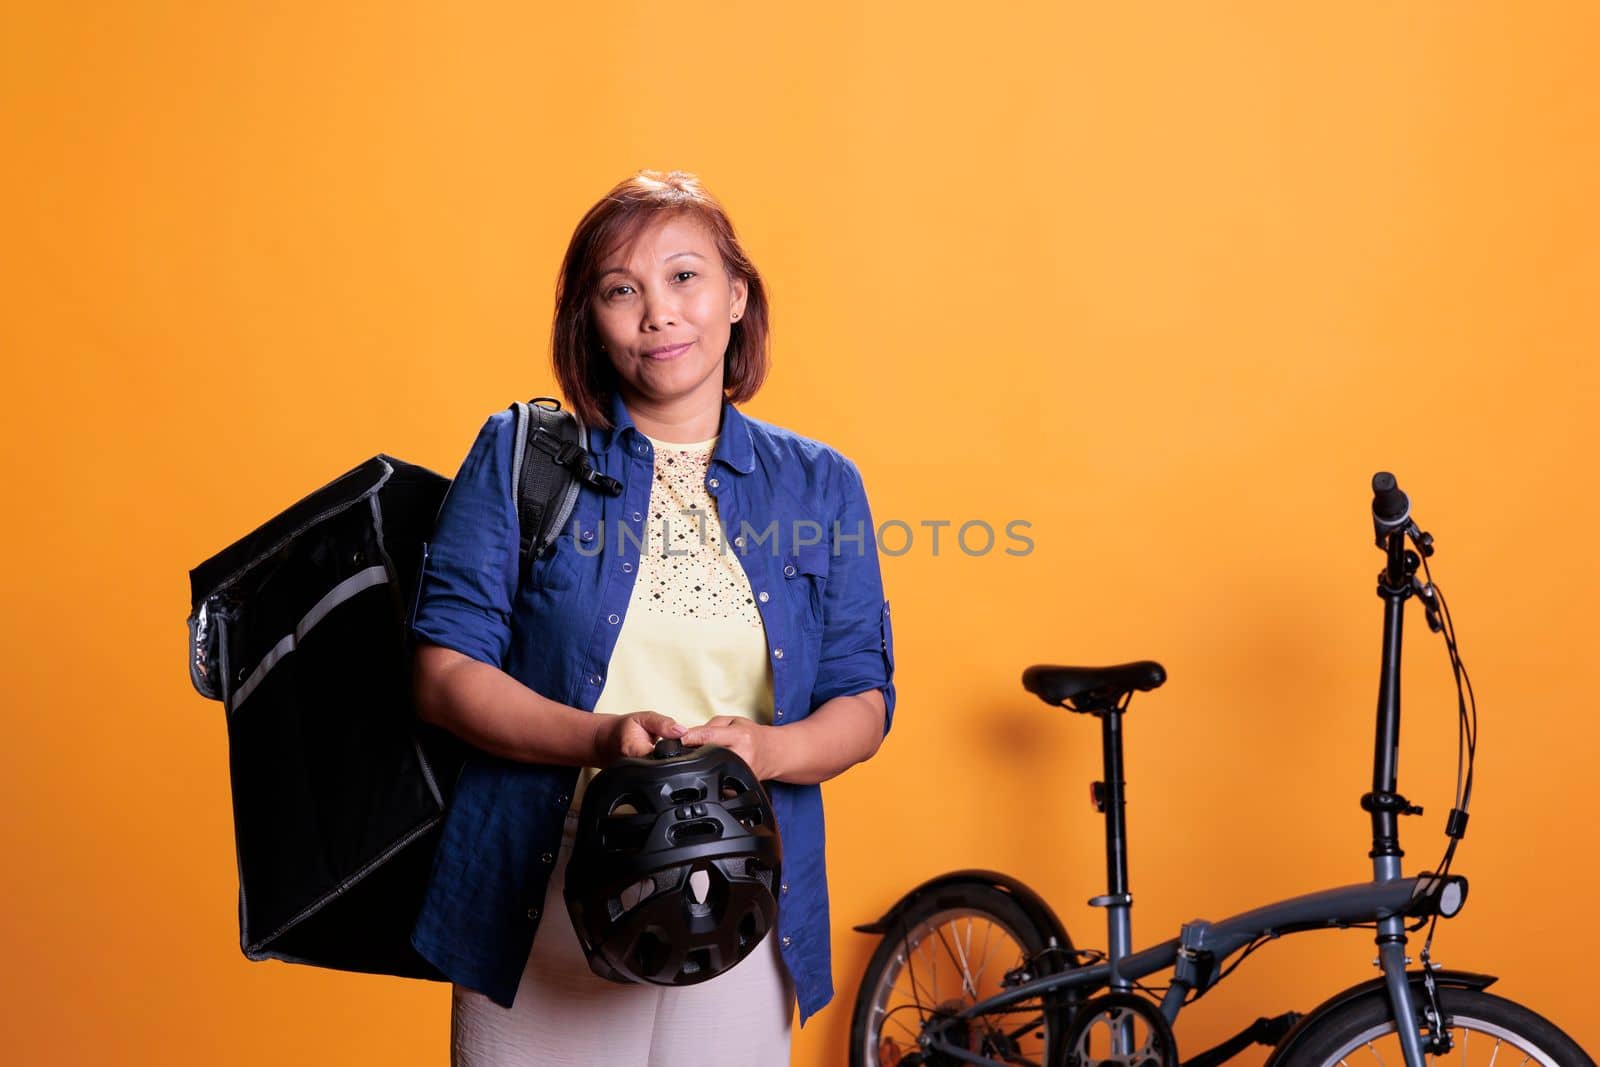 Elderly deliverywoman carrying thermal delivery backpack standing beside bike in studio with yellow background. Restaurant worker delivering pizza for lunch. Food transportation service and concept